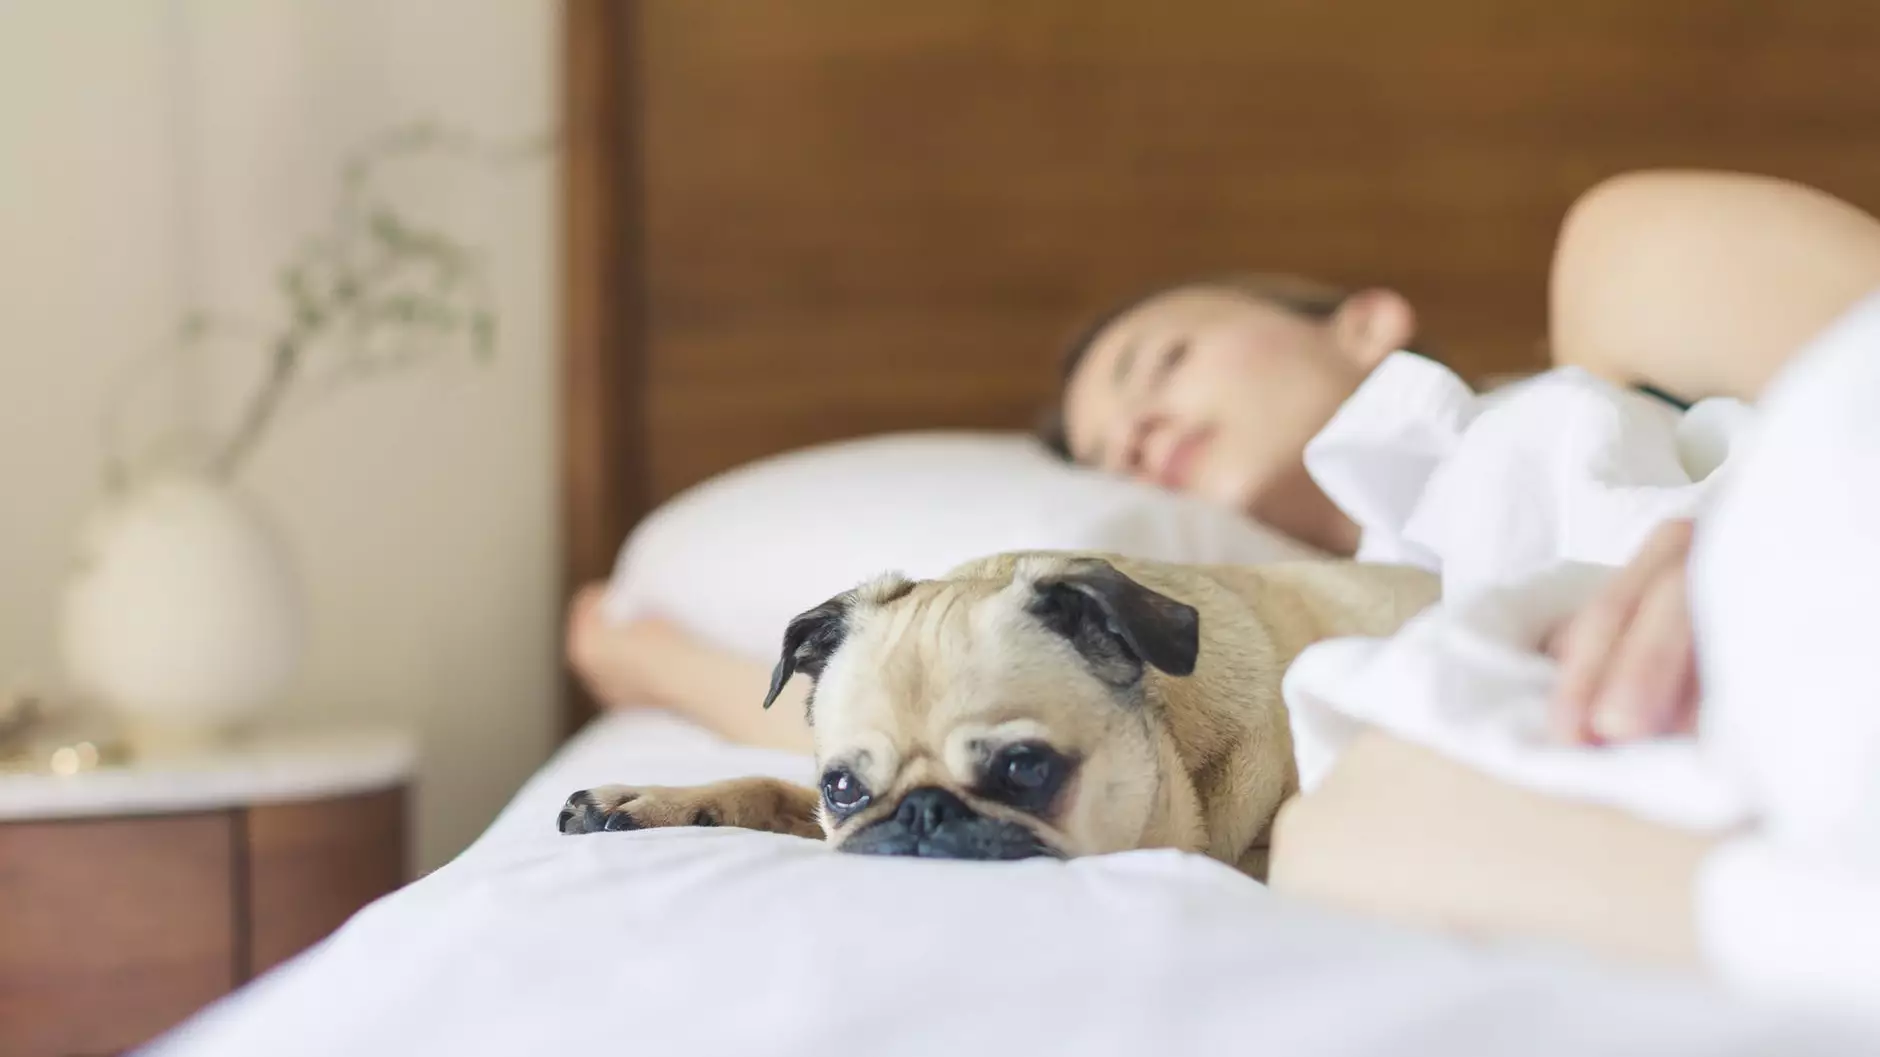 Study Suggests Women Sleep Better Next To Dogs Than Men